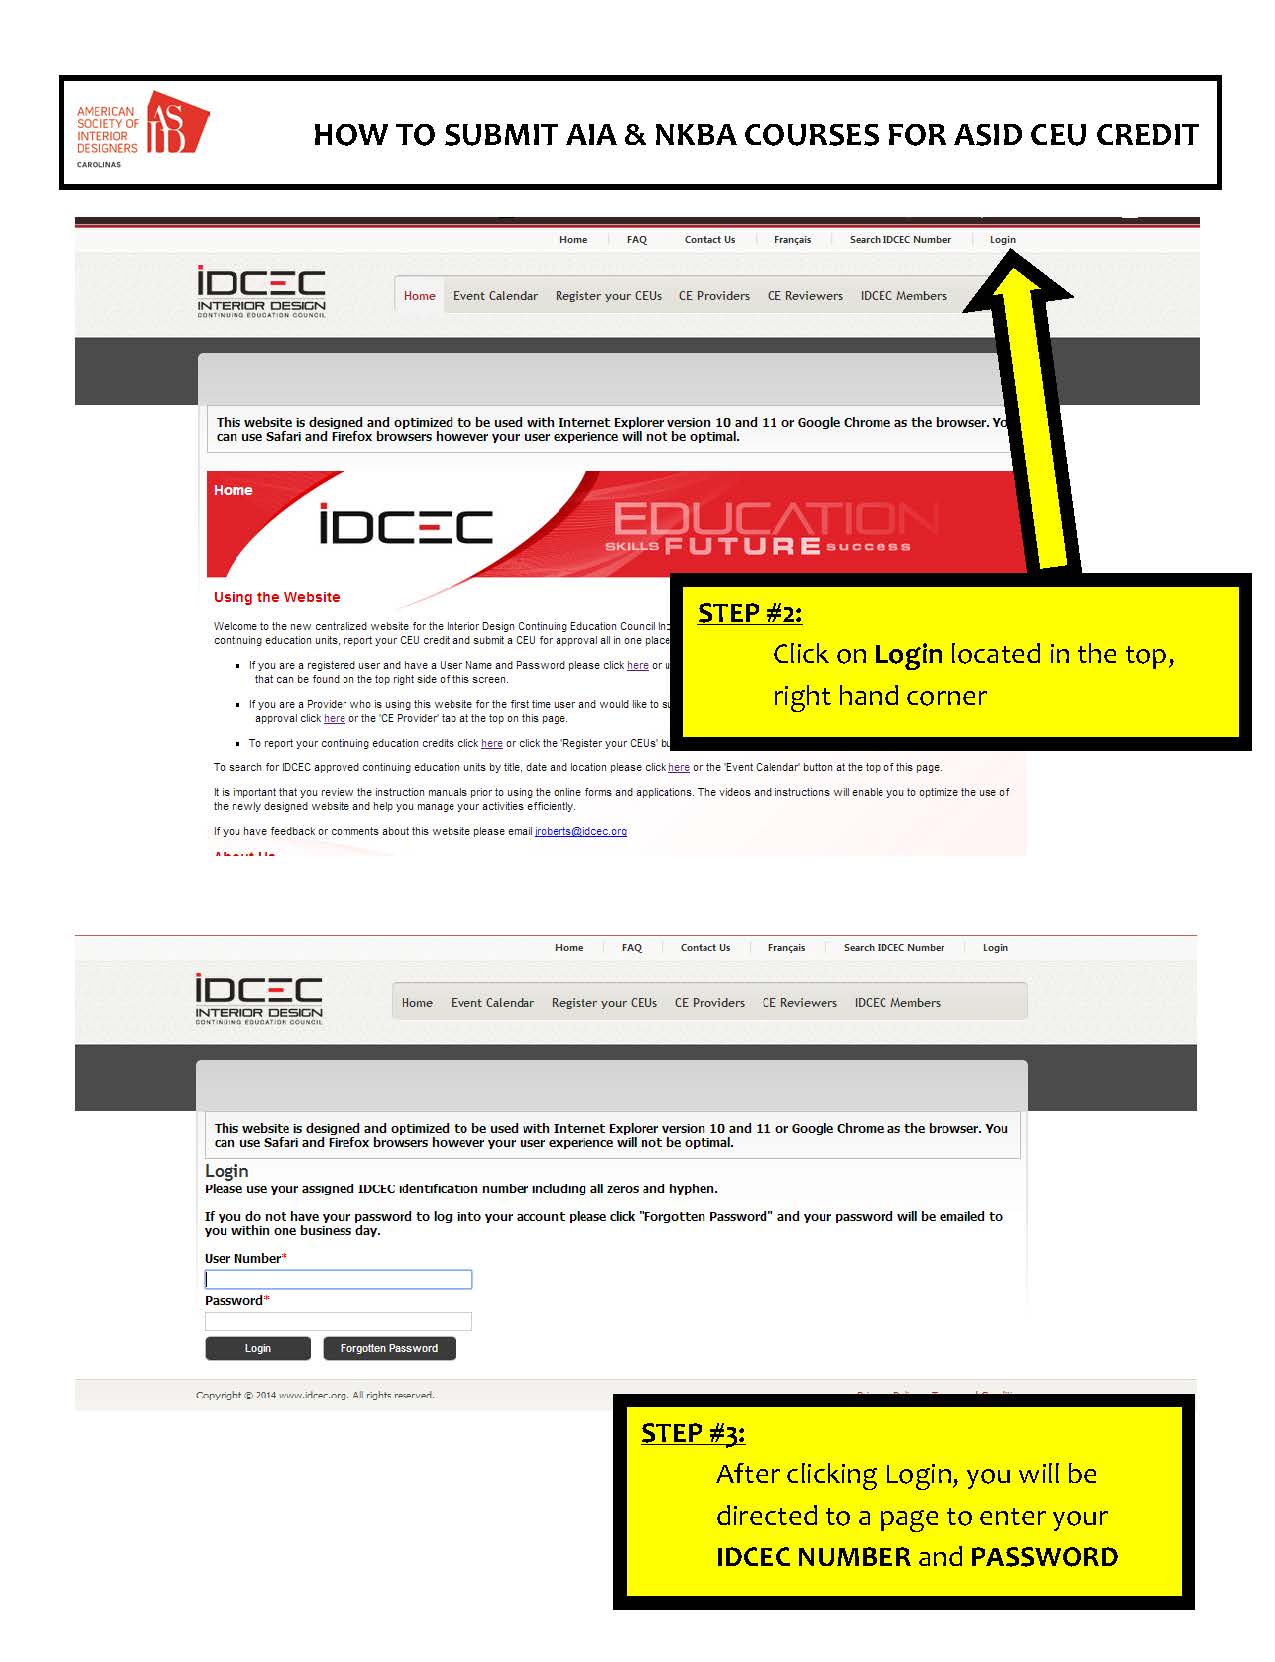 HOW TO SUBMIT AIA  NKBA COURSES FOR ASID CEU CREDIT Page 02